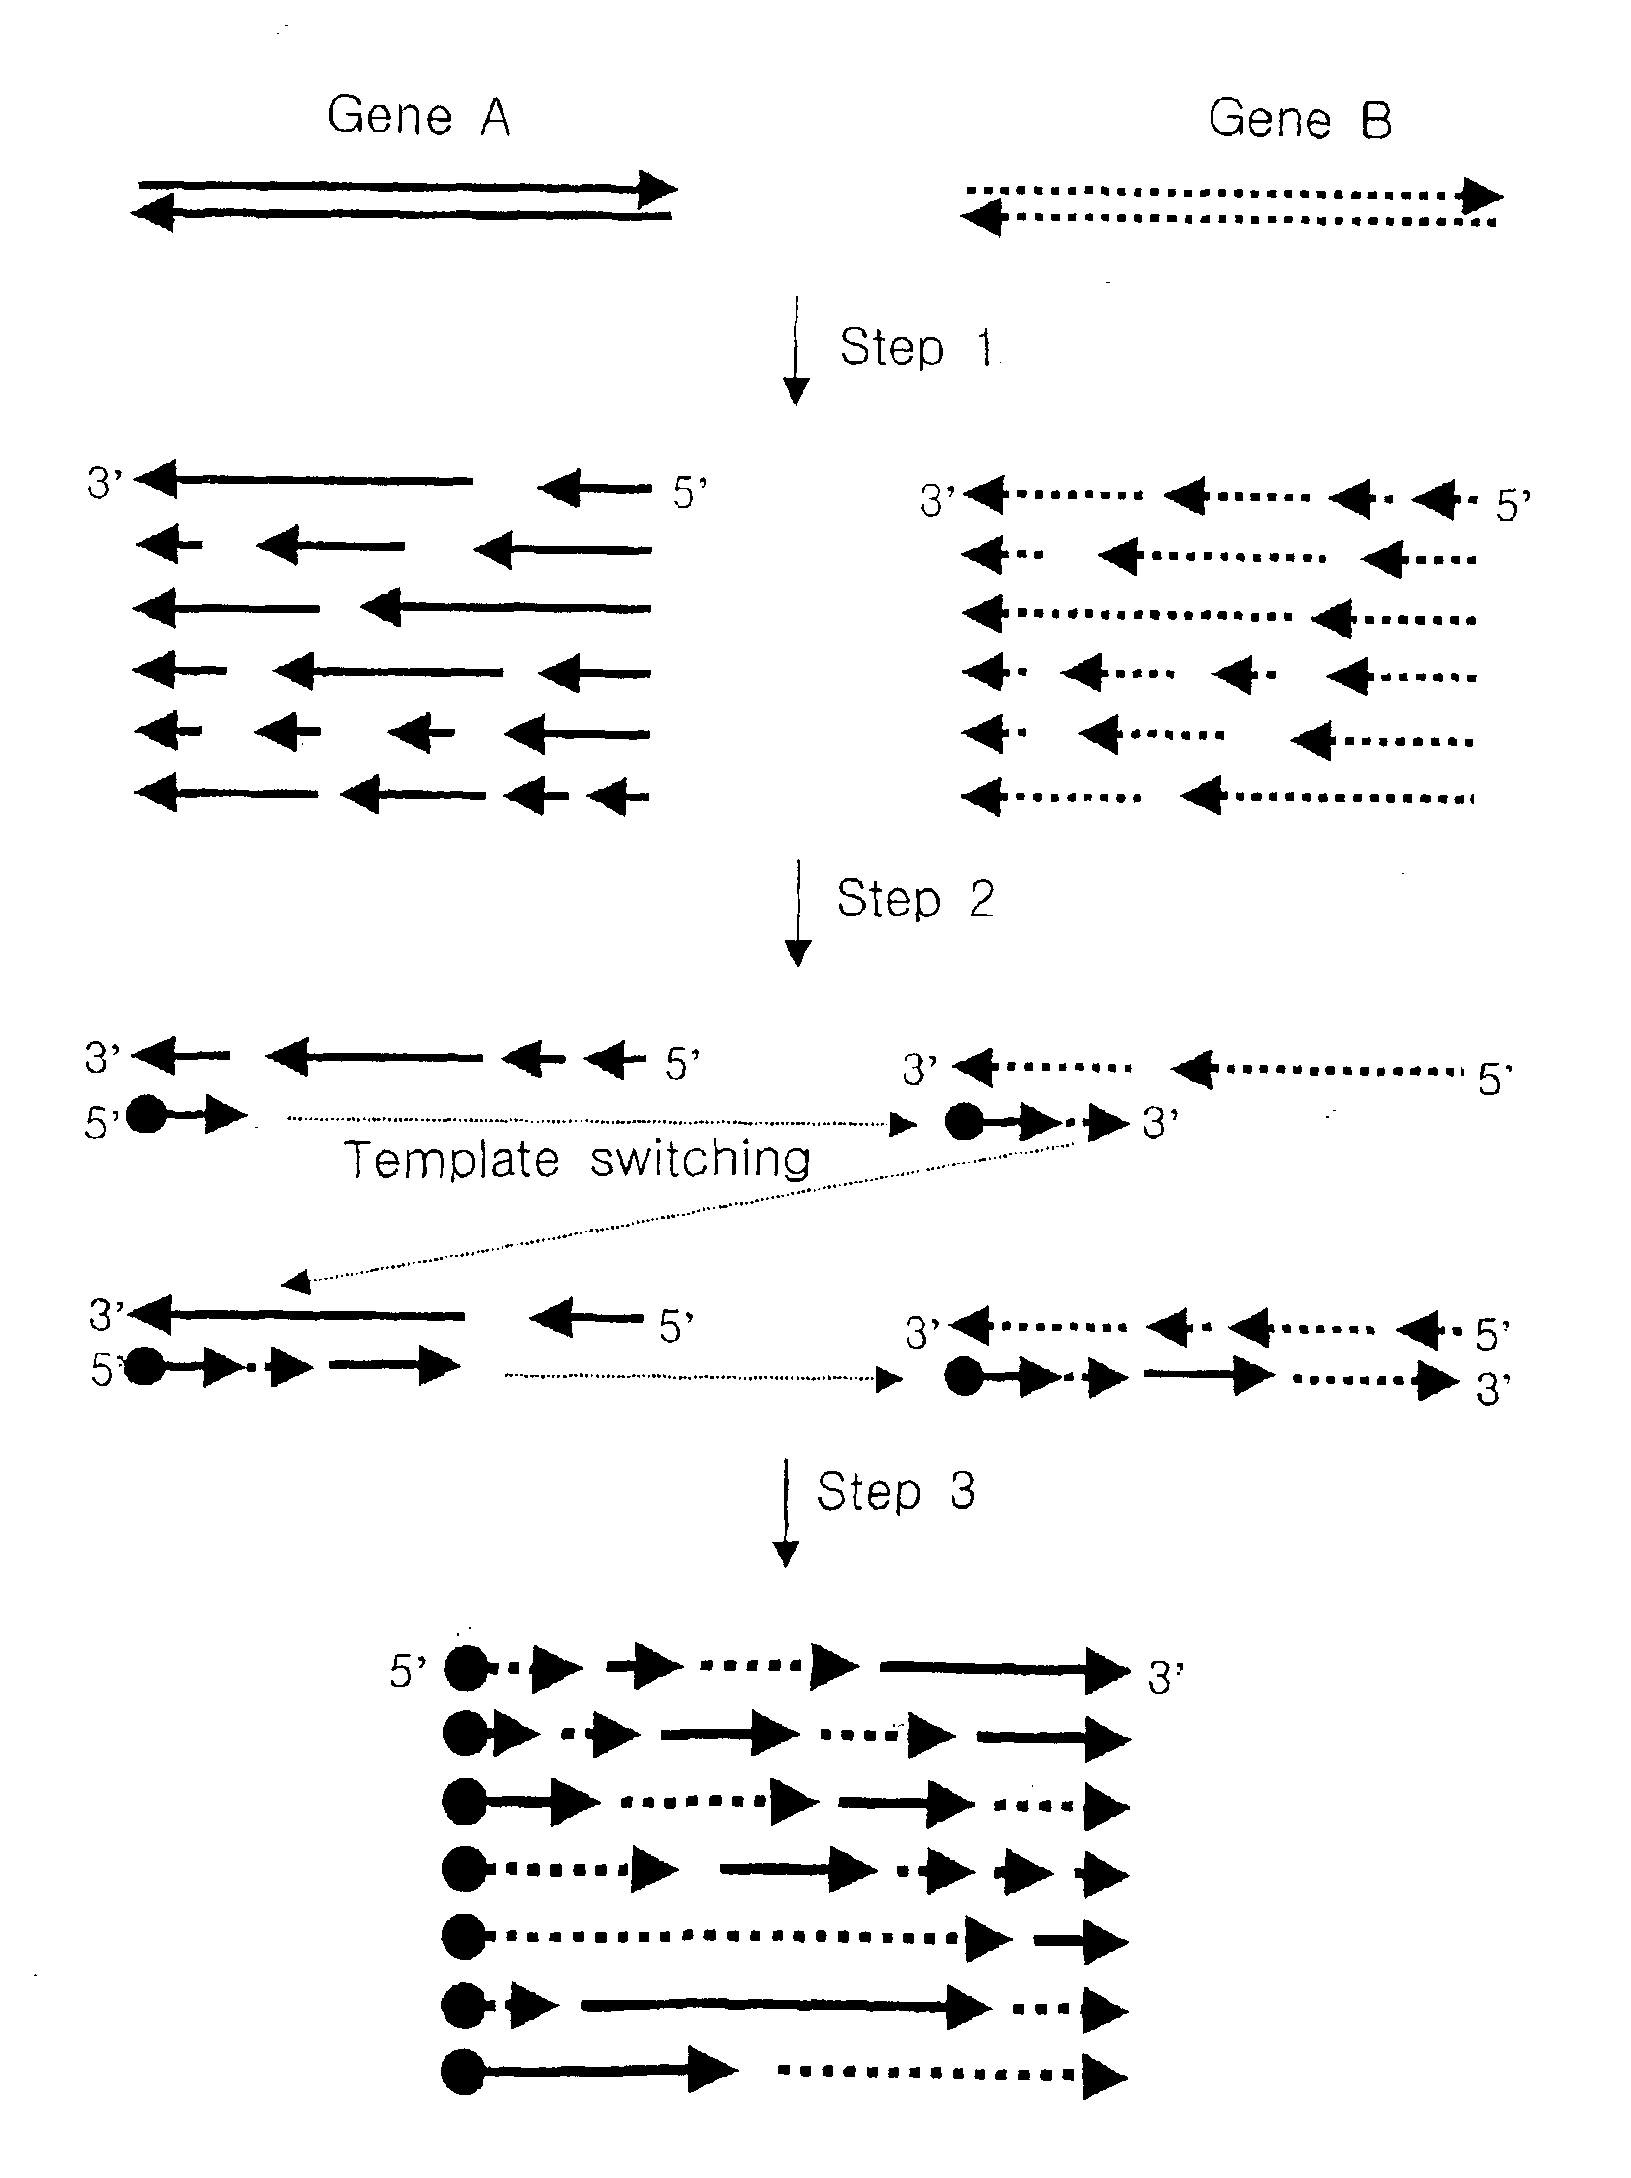 Method for generating recombinant DNA library using unidirectional single-stranded DNA fragments